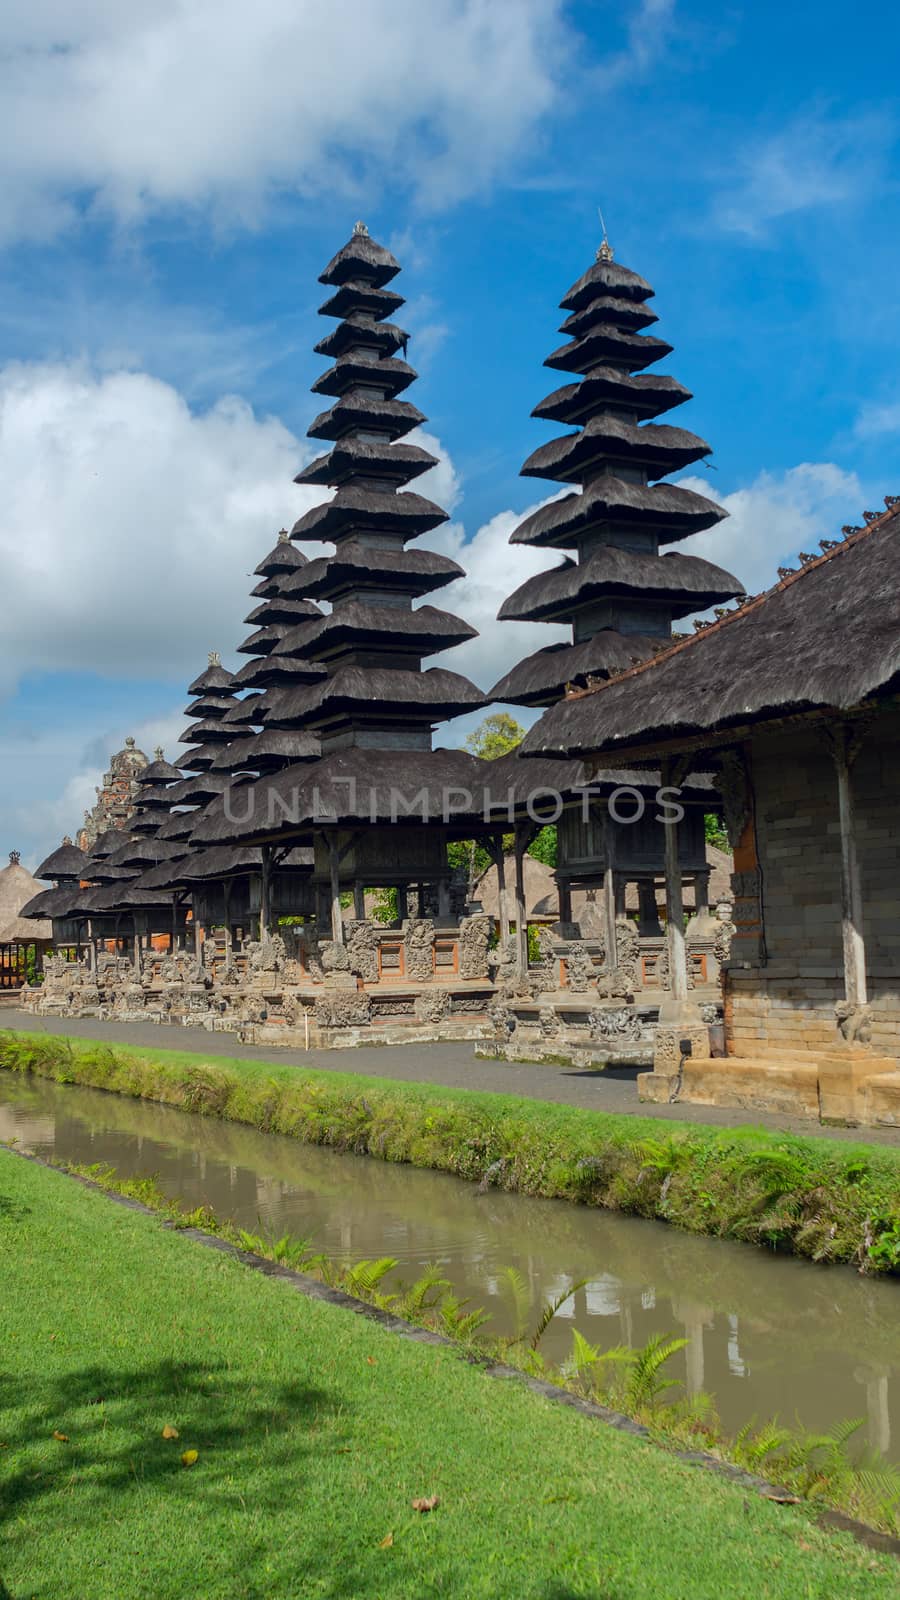 View of the temple complex in Bali on a sunny day